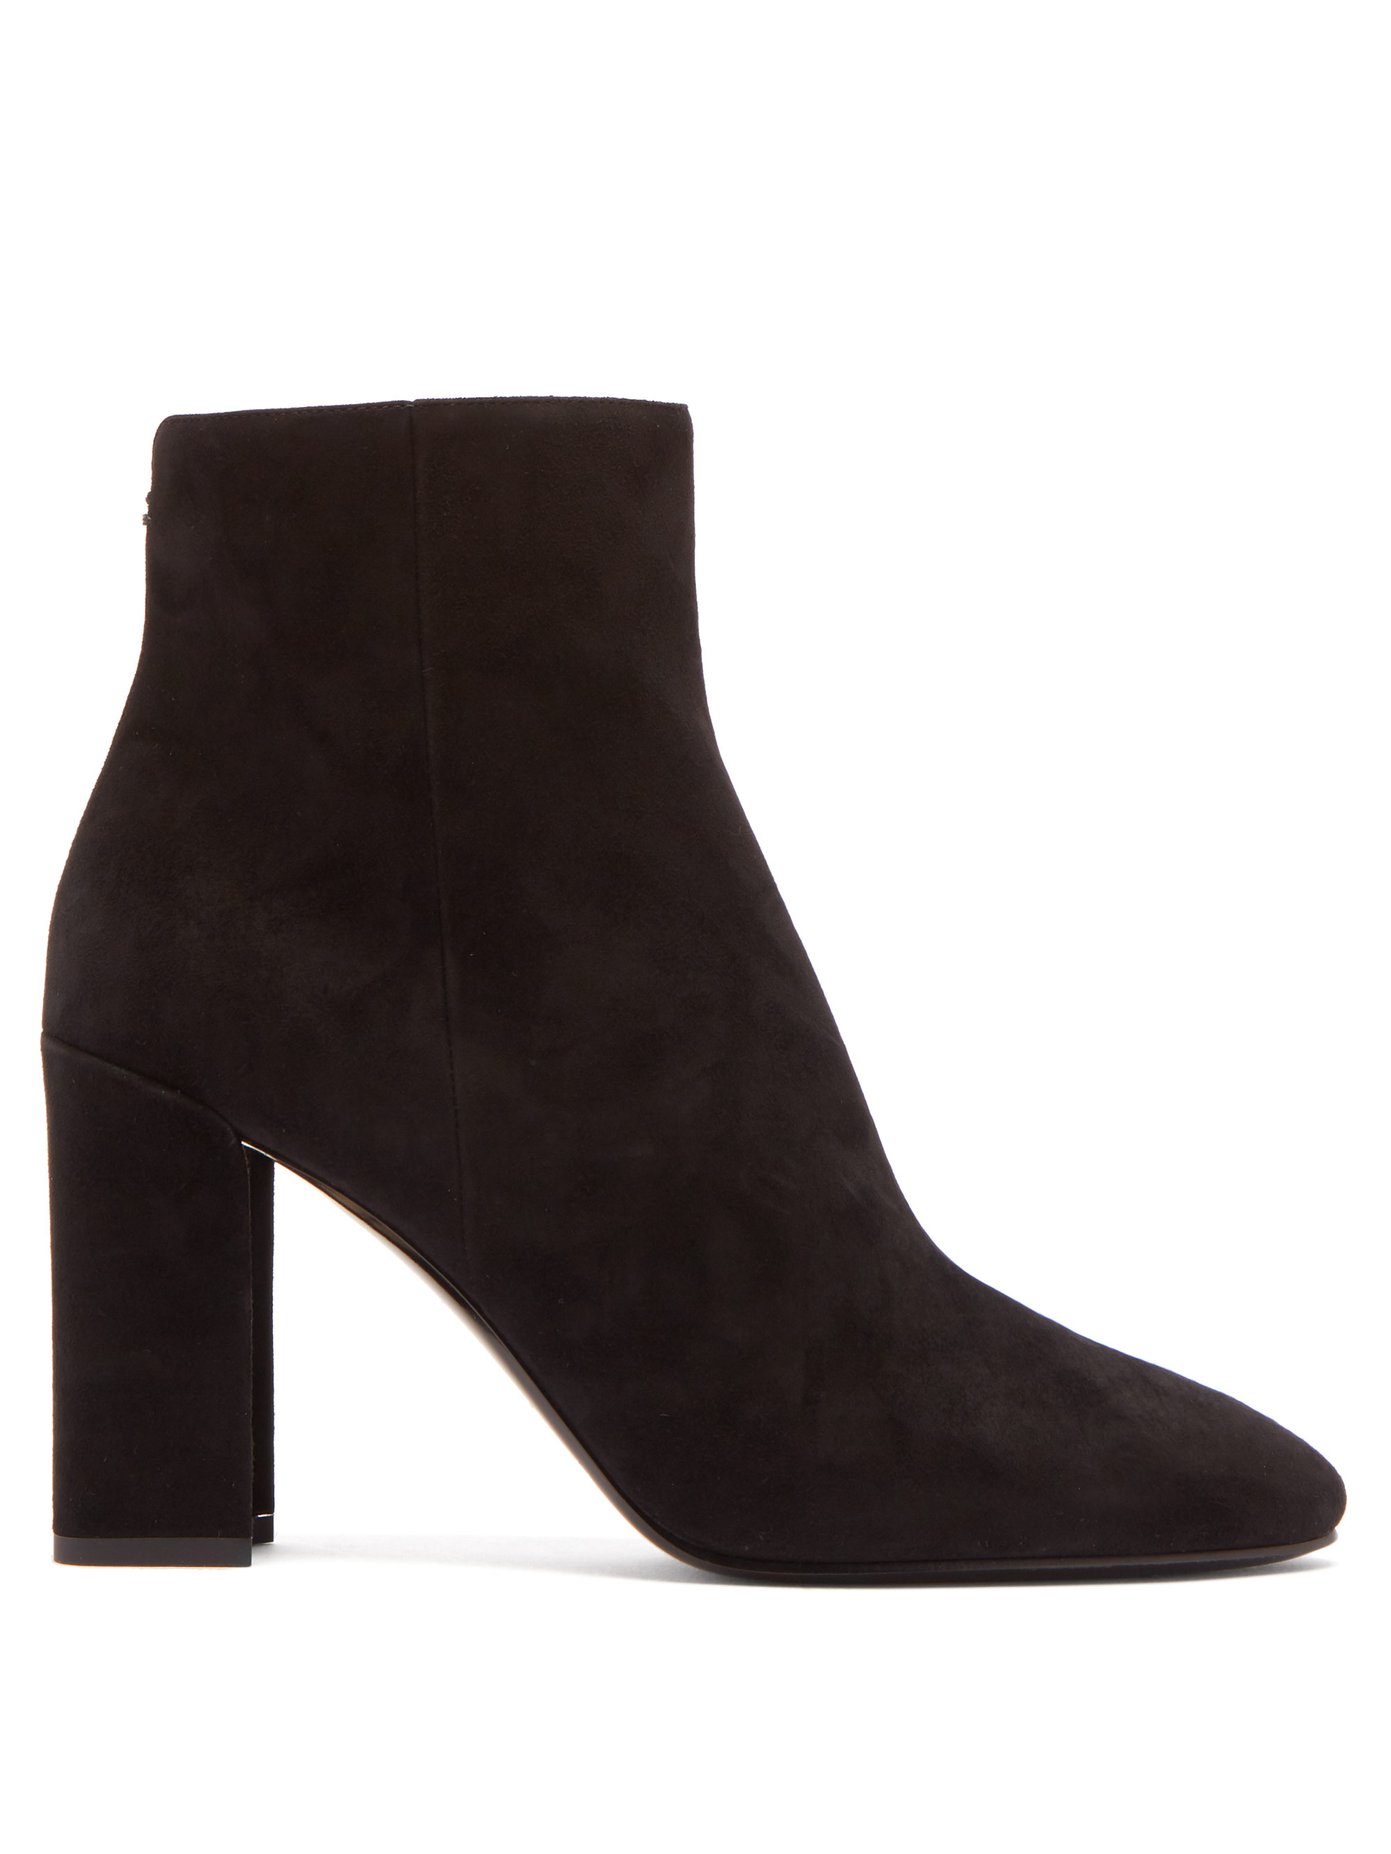 suede ankle boots uk